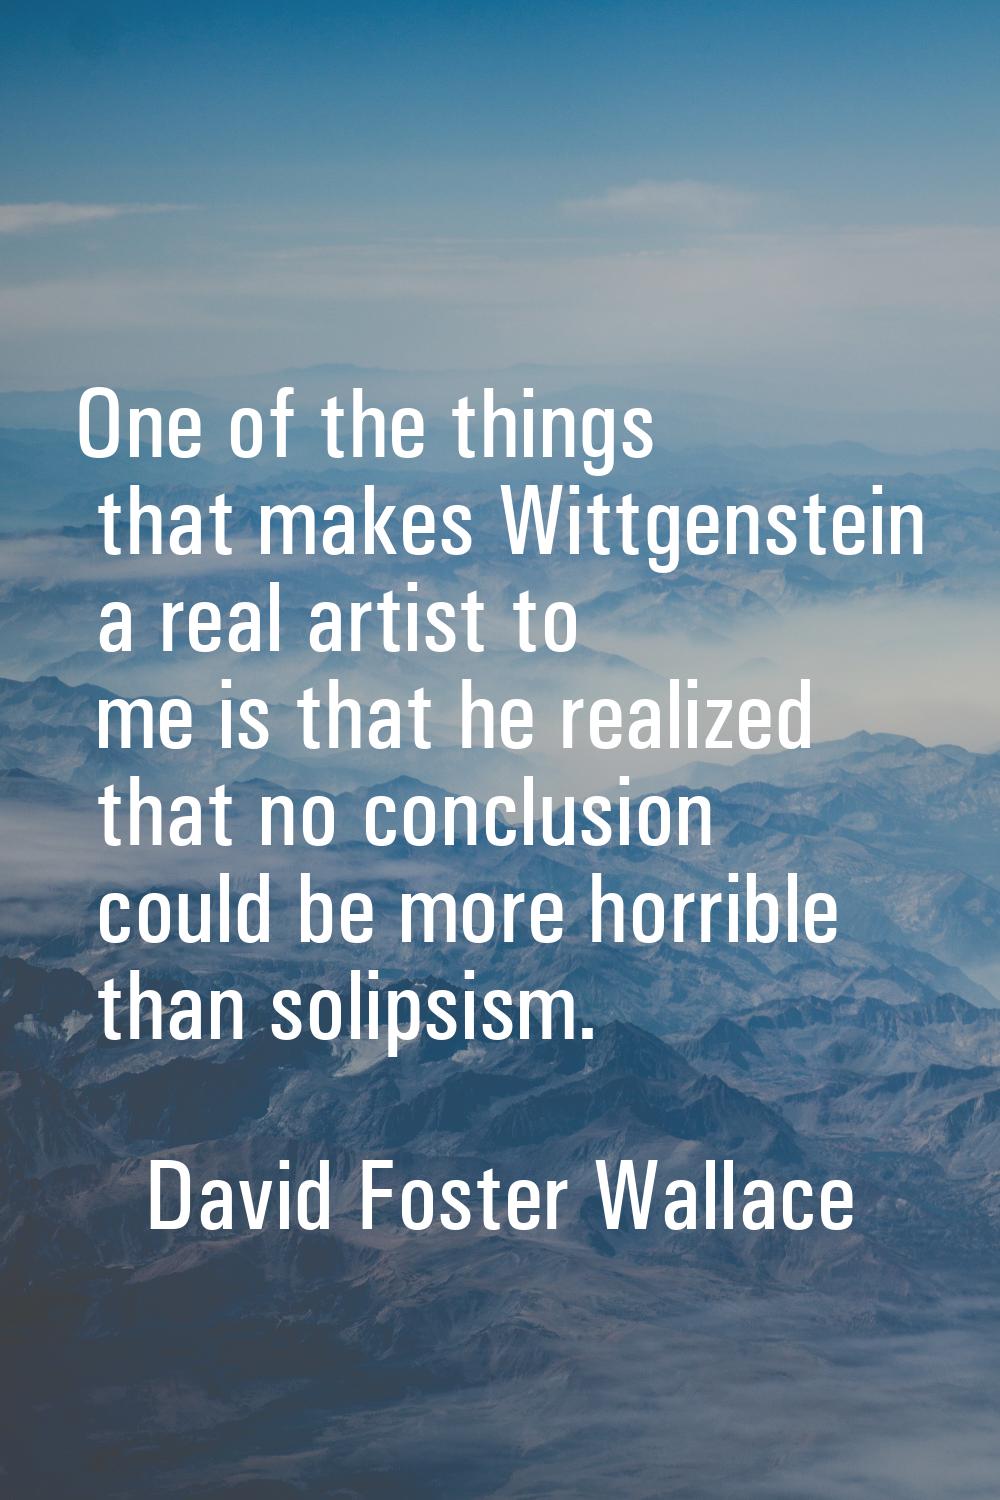 One of the things that makes Wittgenstein a real artist to me is that he realized that no conclusio